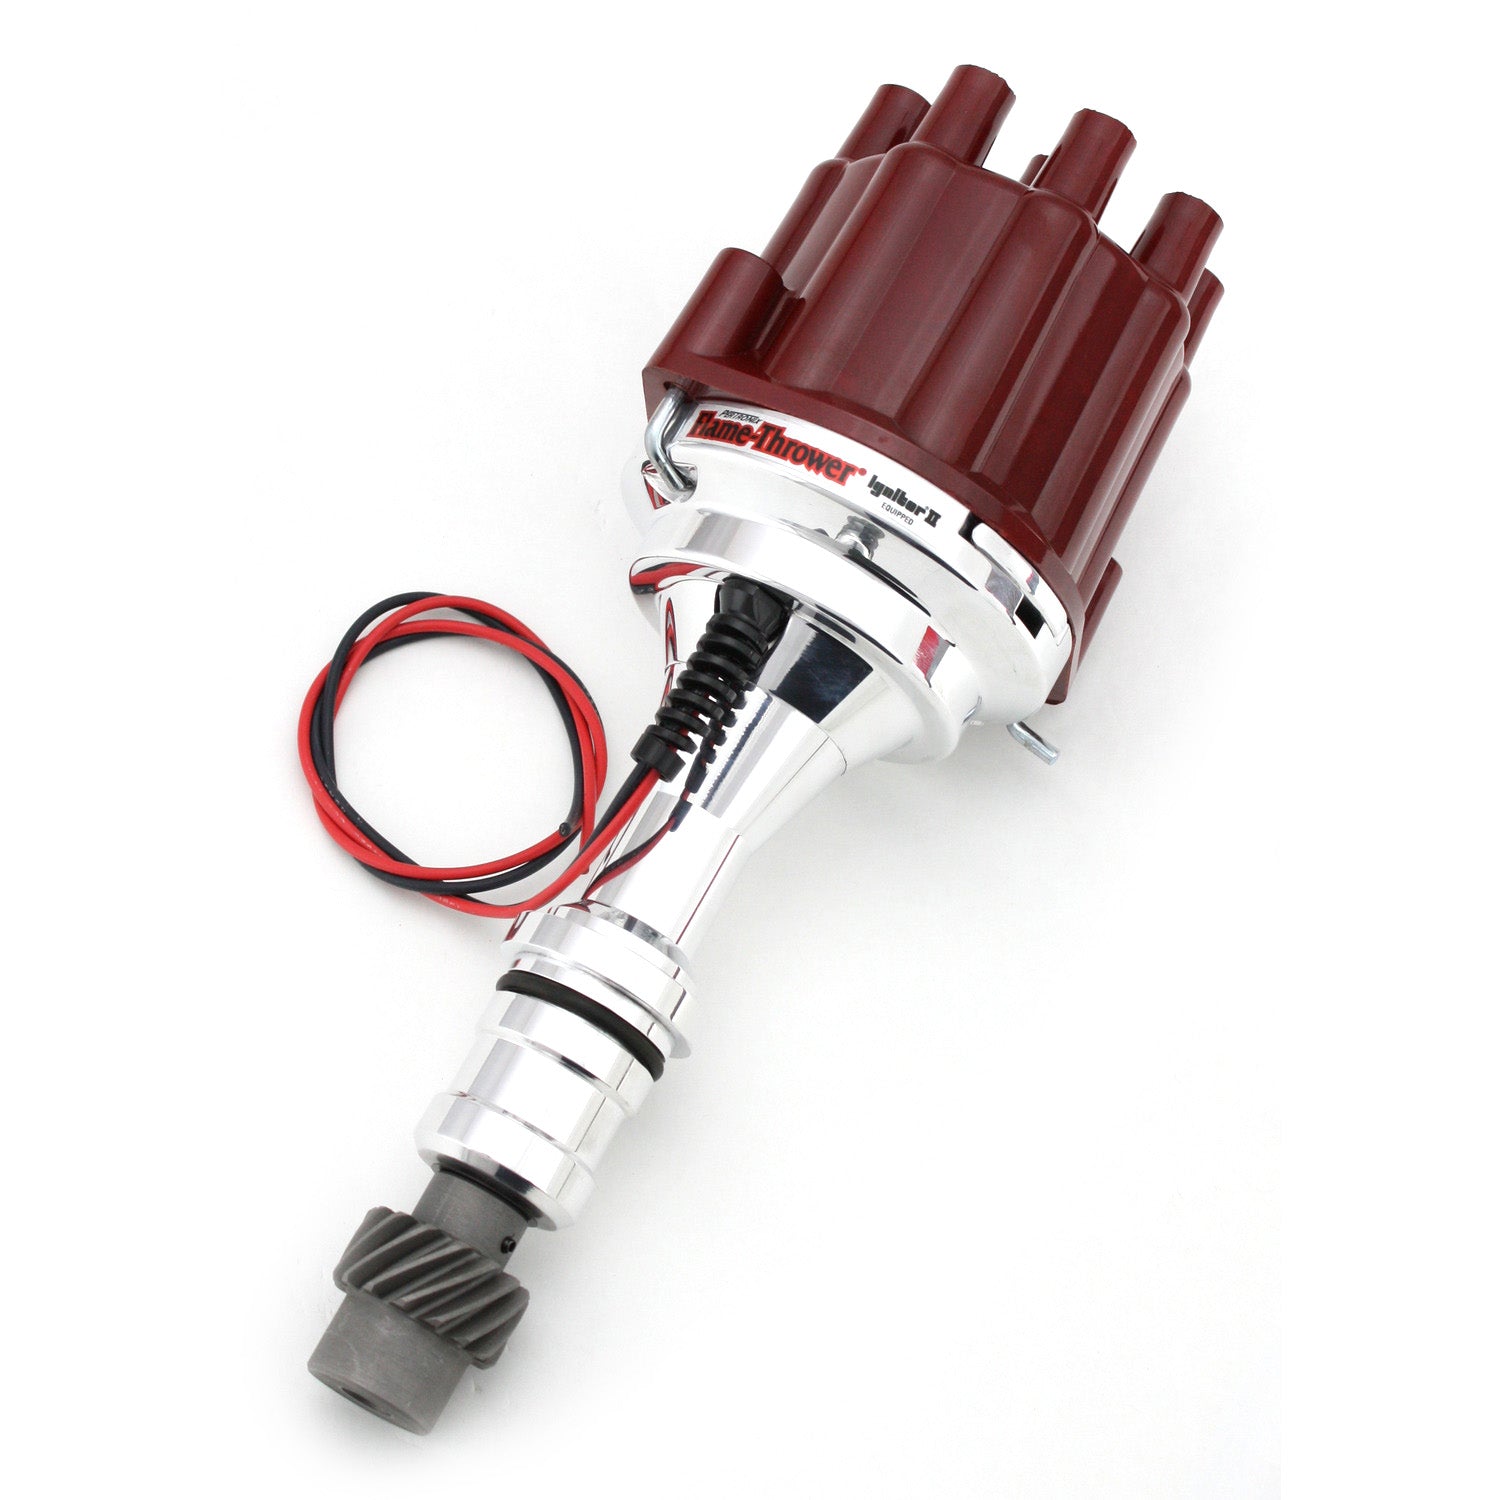 PerTronix D110801 Flame-Thrower Electronic Distributor Billet Oldsmobile V8 Plug and Play with Ignitor II Technology Non Vacuum Advance Red Cap